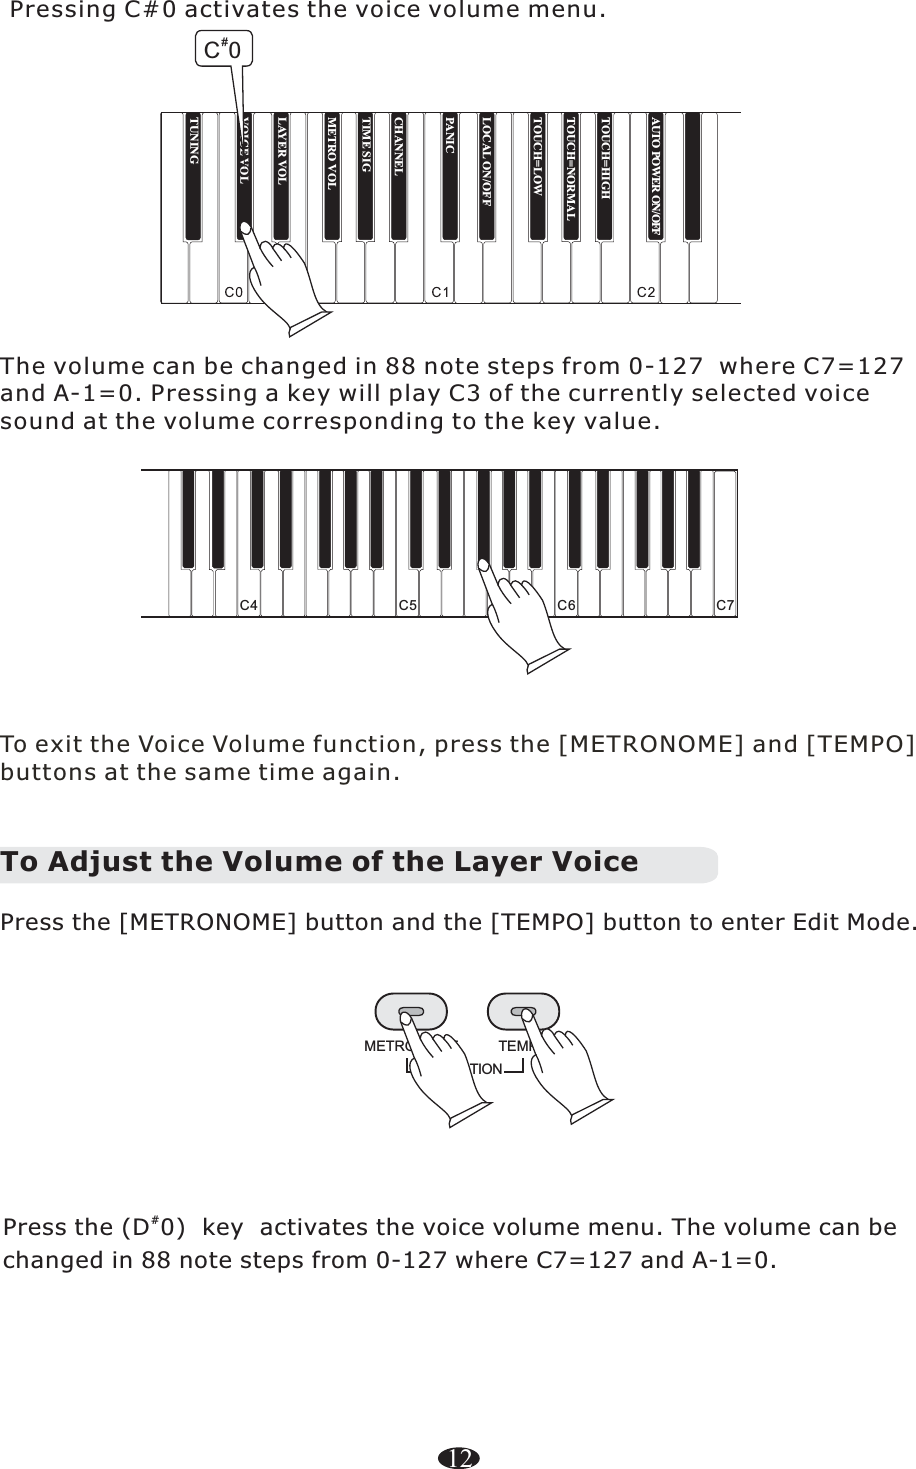 TUNINGTOUCH=HIGHTOUCH=NORMALTOUCH=LOWLOCAL ON/OFFPANICCHANNELTIME SIGMETRO VOLLAYER VOLVOICE VOL12#Press the (D 0)  key  activates the voice volume menu. The volume can be changed in 88 note steps from 0-127 where C7=127 and A-1=0.    To exit the Voice Volume function, press the [METRONOME] and [TEMPO] buttons at the same time again.The volume can be changed in 88 note steps from 0-127  where C7=127 and A-1=0. Pressing a key will play C3 of the currently selected voice sound at the volume corresponding to the key value.C4 C5 C6 C7FUNCTIONTEMPOMETRONOMETo Adjust the Volume of the Layer Voice    Press the [METRONOME] button and the [TEMPO] button to enter Edit Mode.Pressing C#0 activates the voice volume menu. #C0AUTO POWER ON/OFF